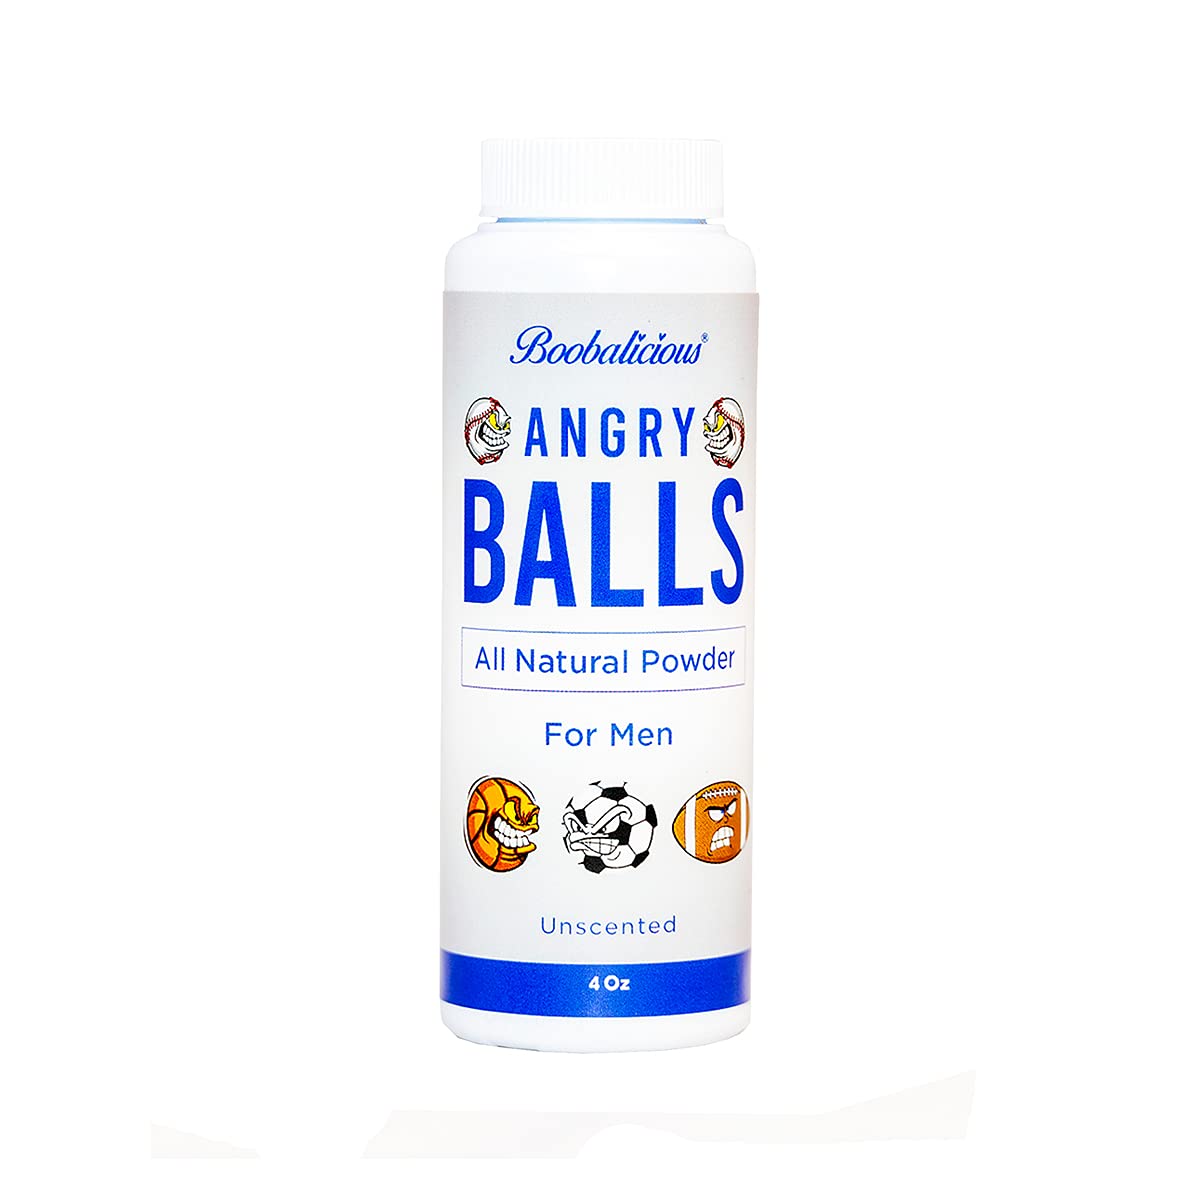 Angry Balls an all natural powder for men